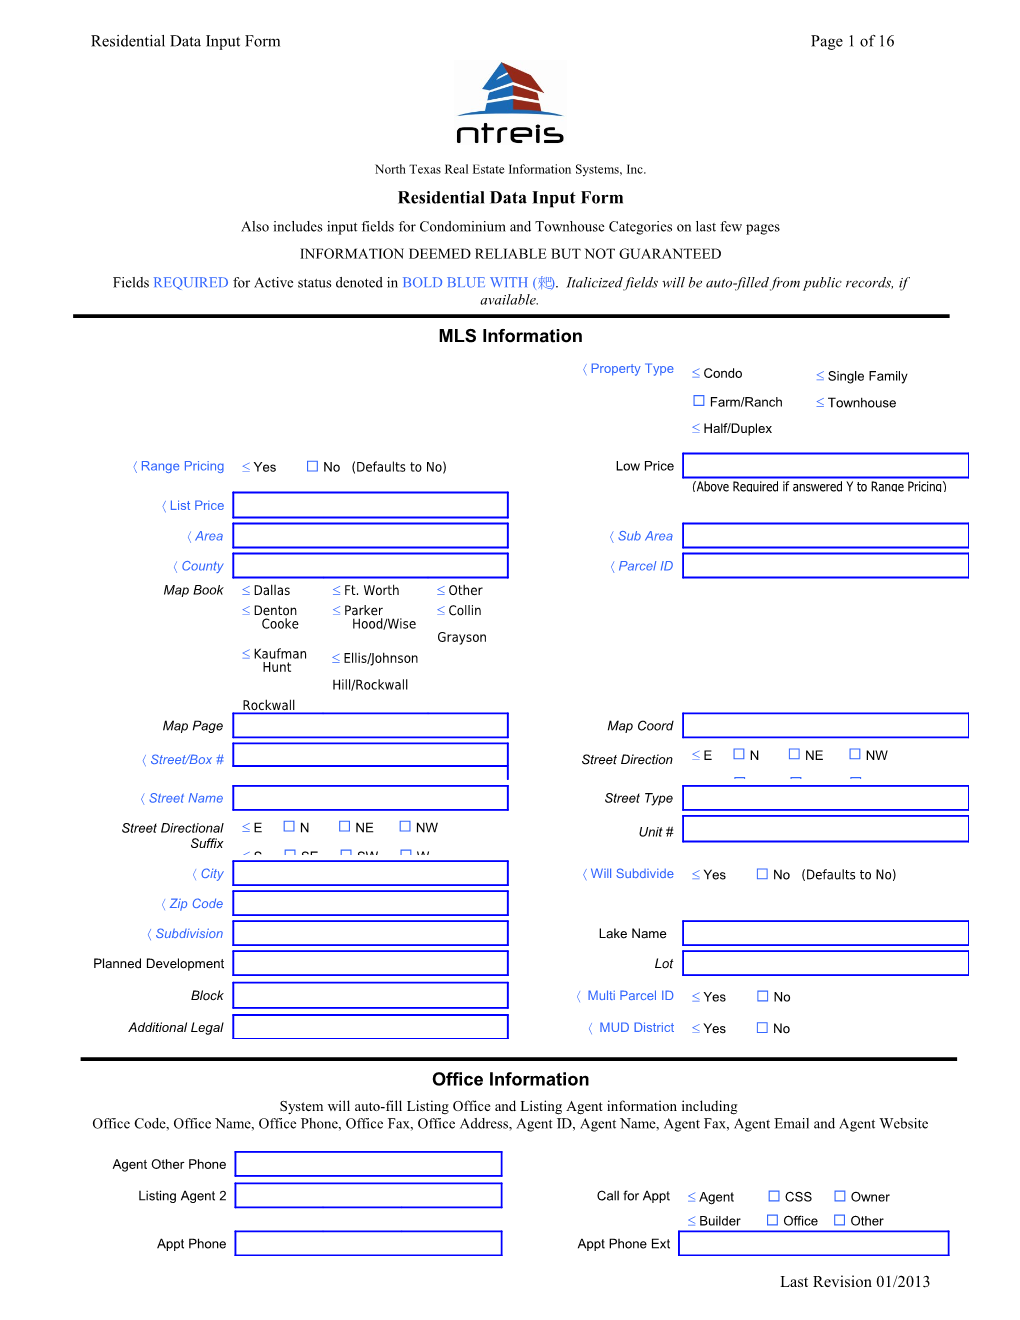 Residential Data Input Form Page 13 of 13